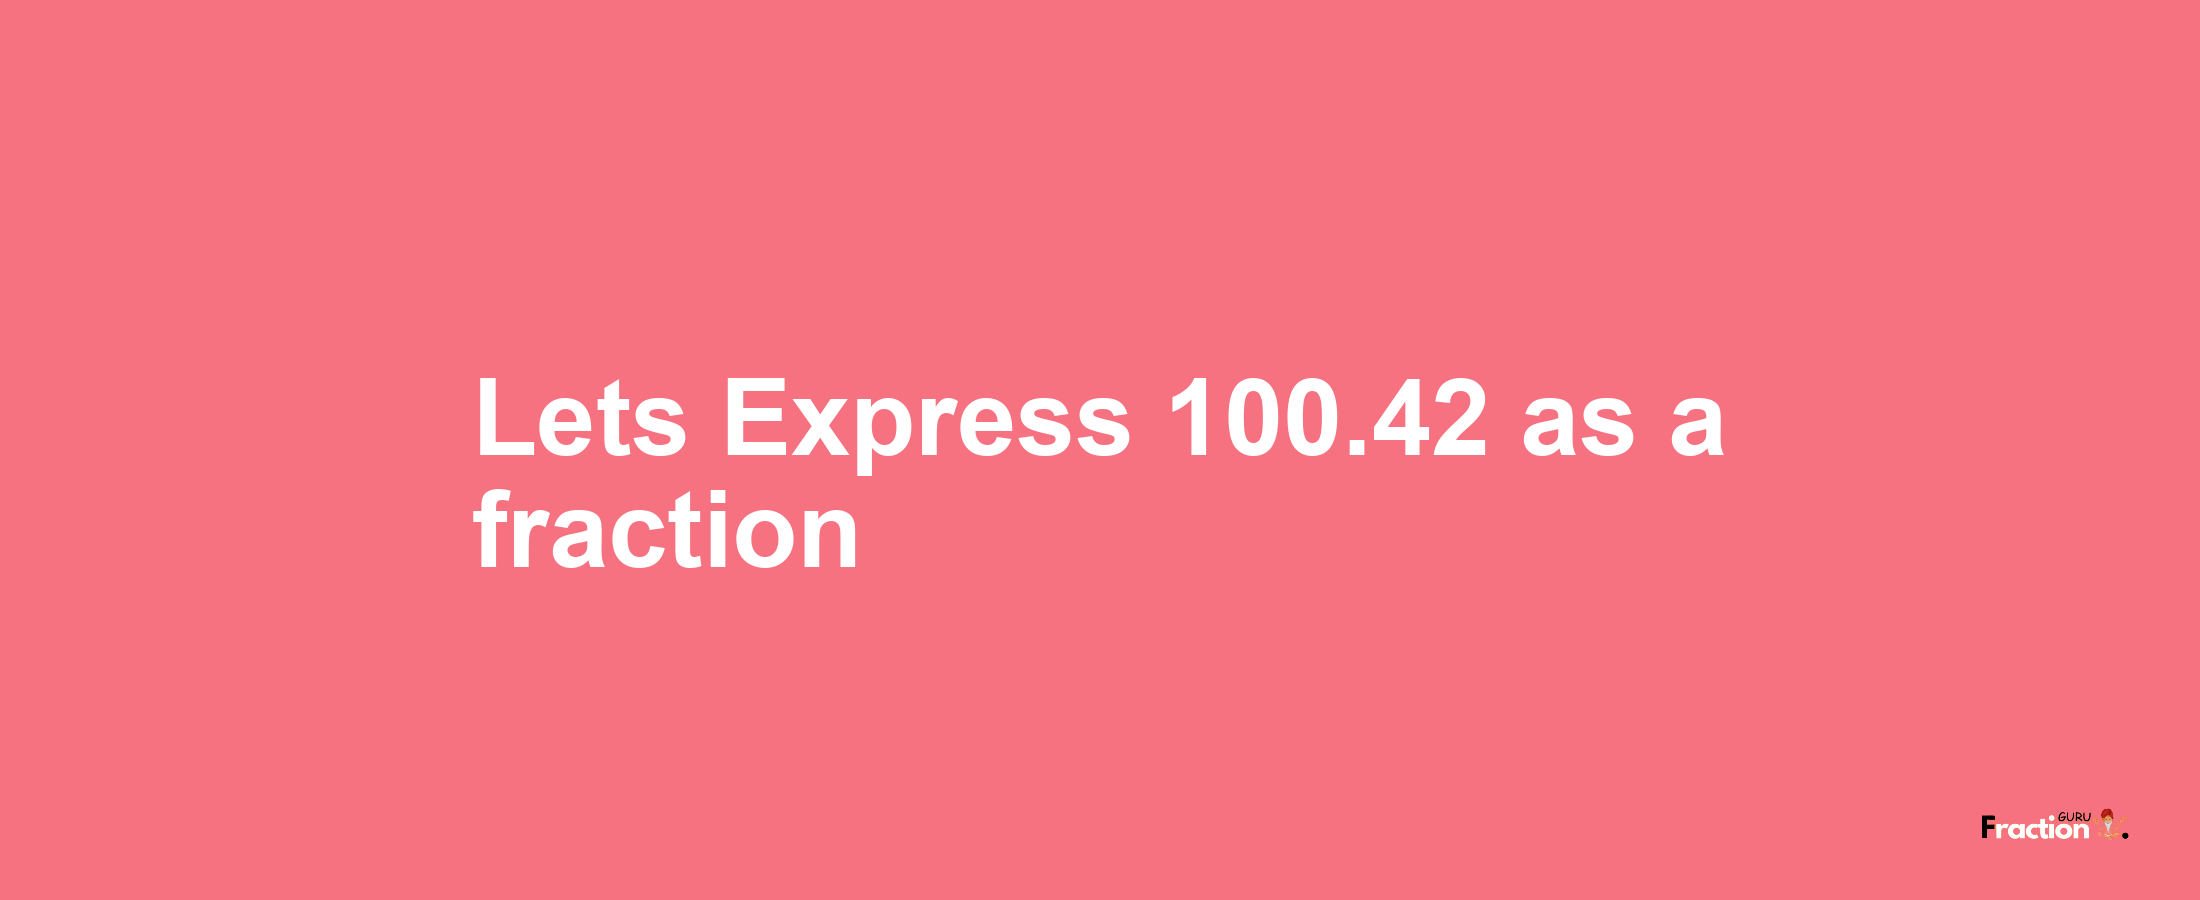 Lets Express 100.42 as afraction